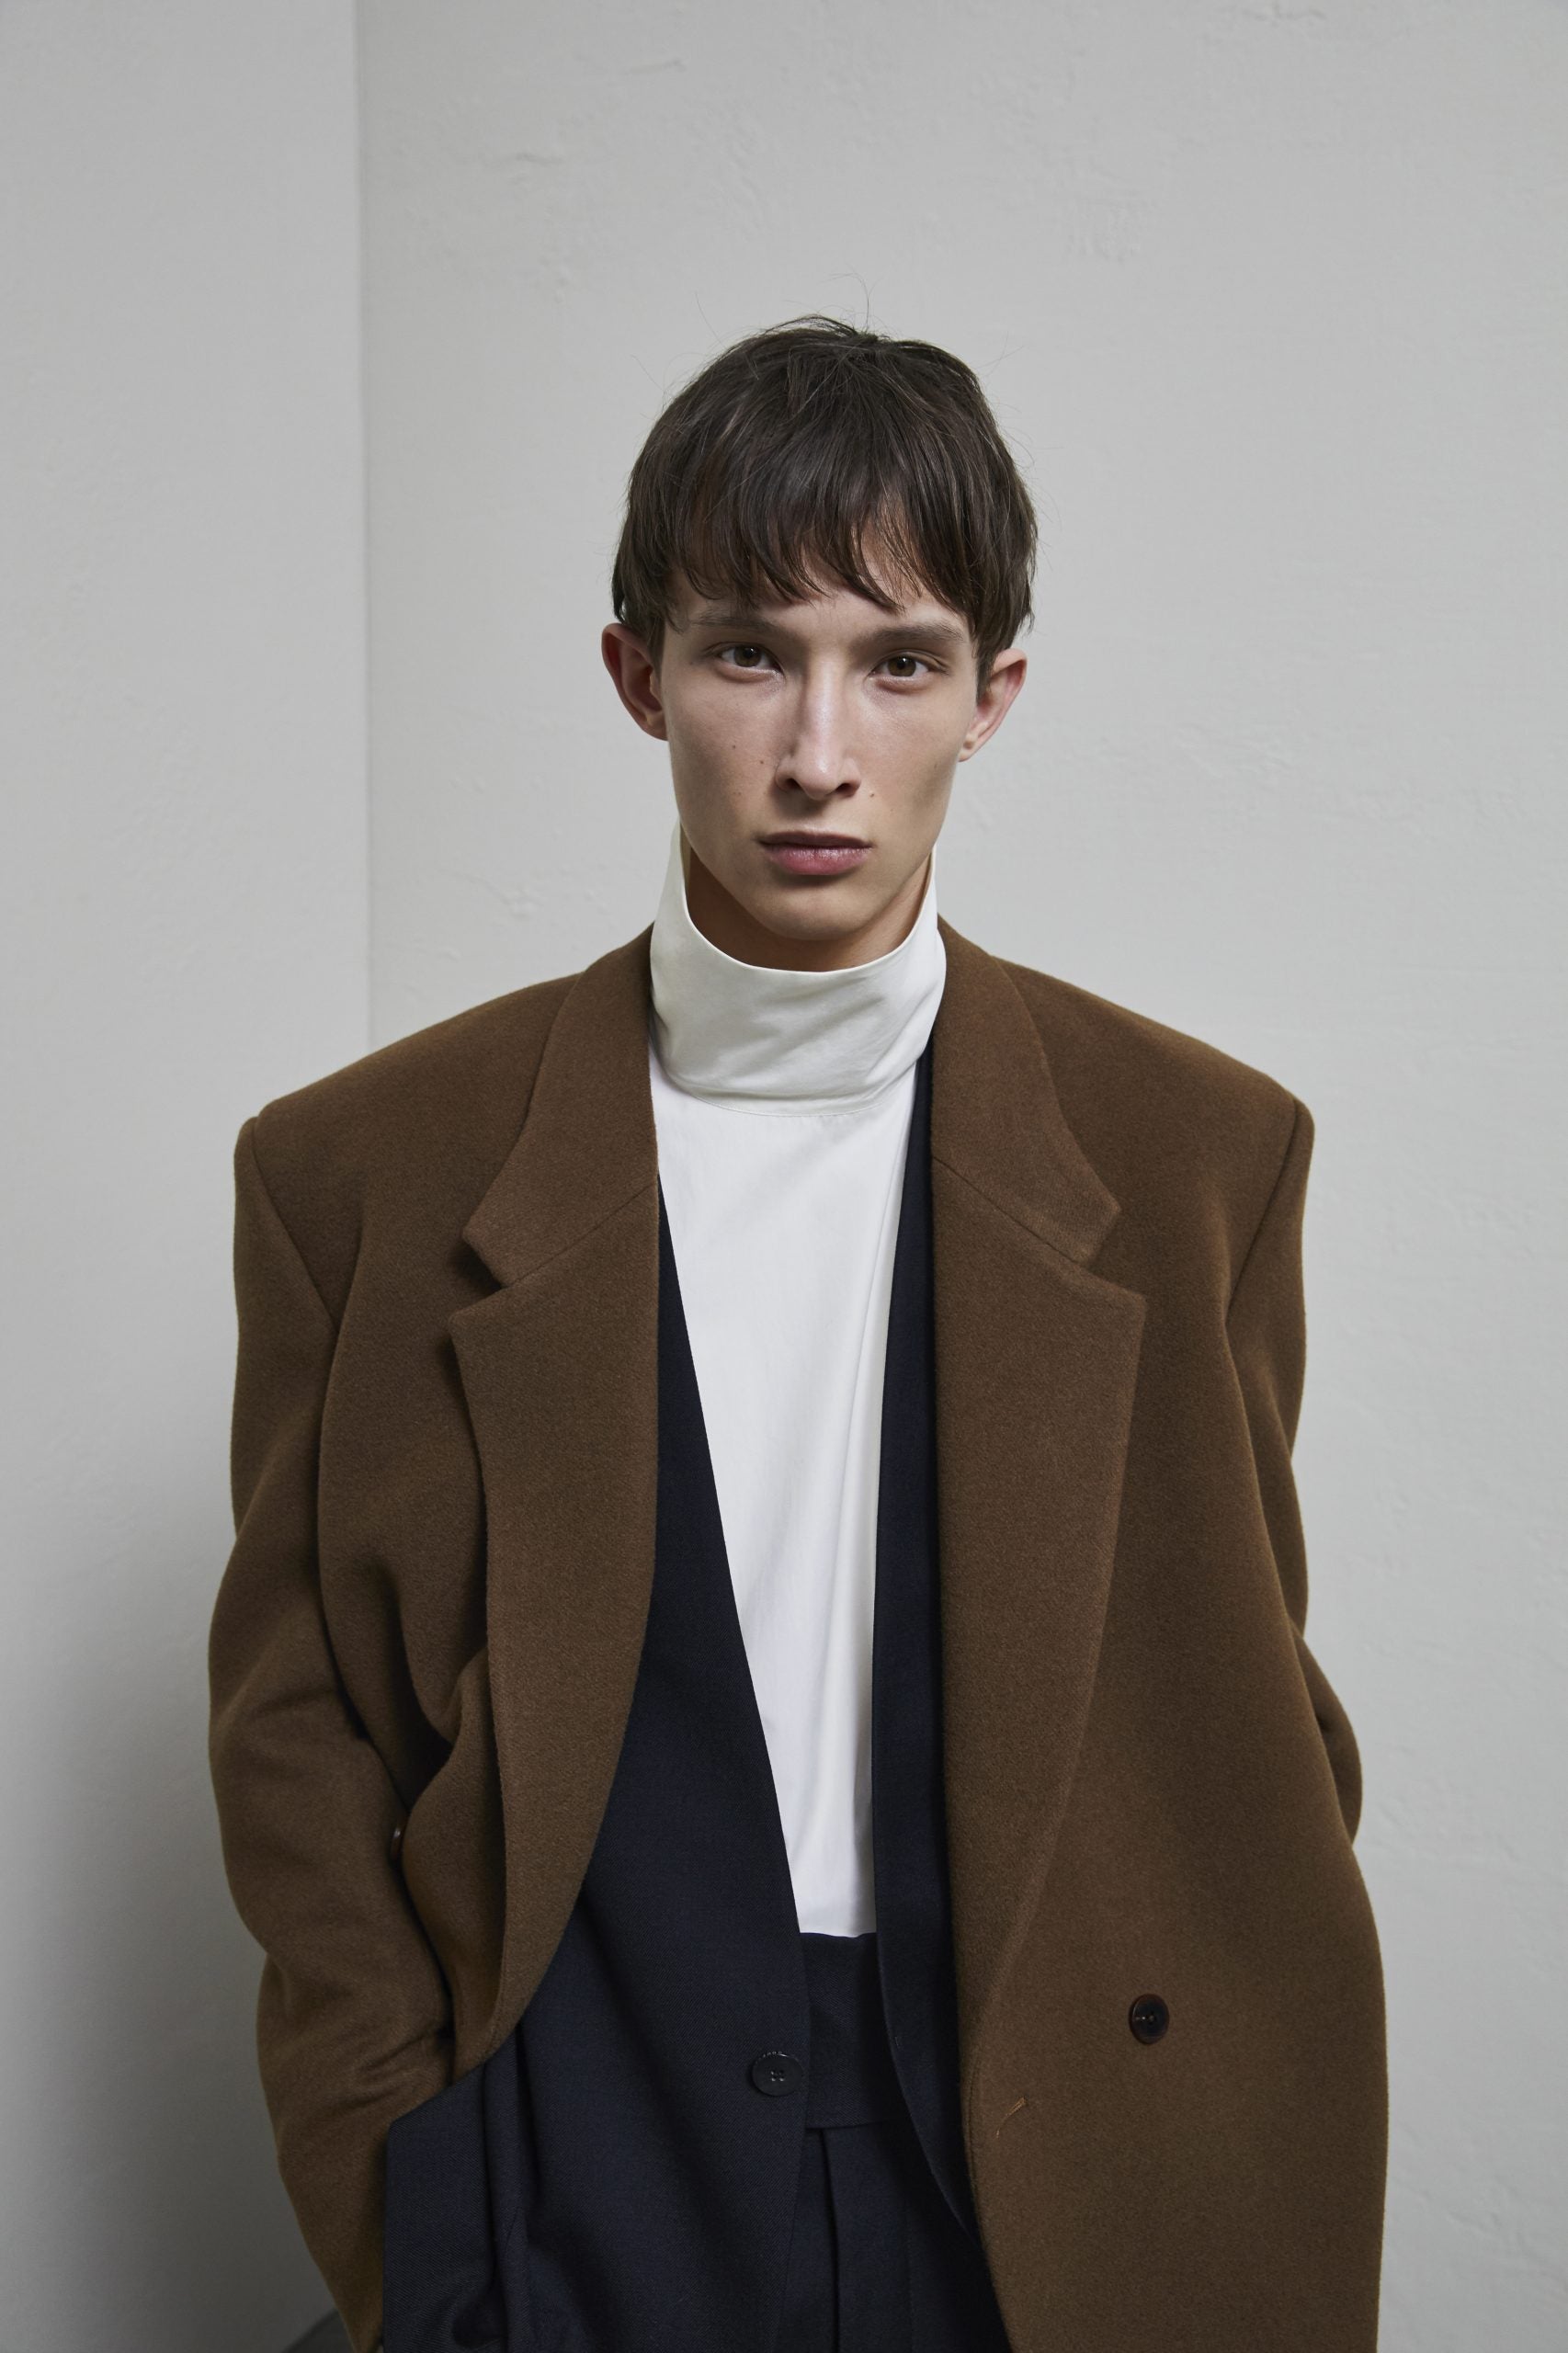 Fear of God Launches An Exclusive Collection With Ermenegildo Zegna